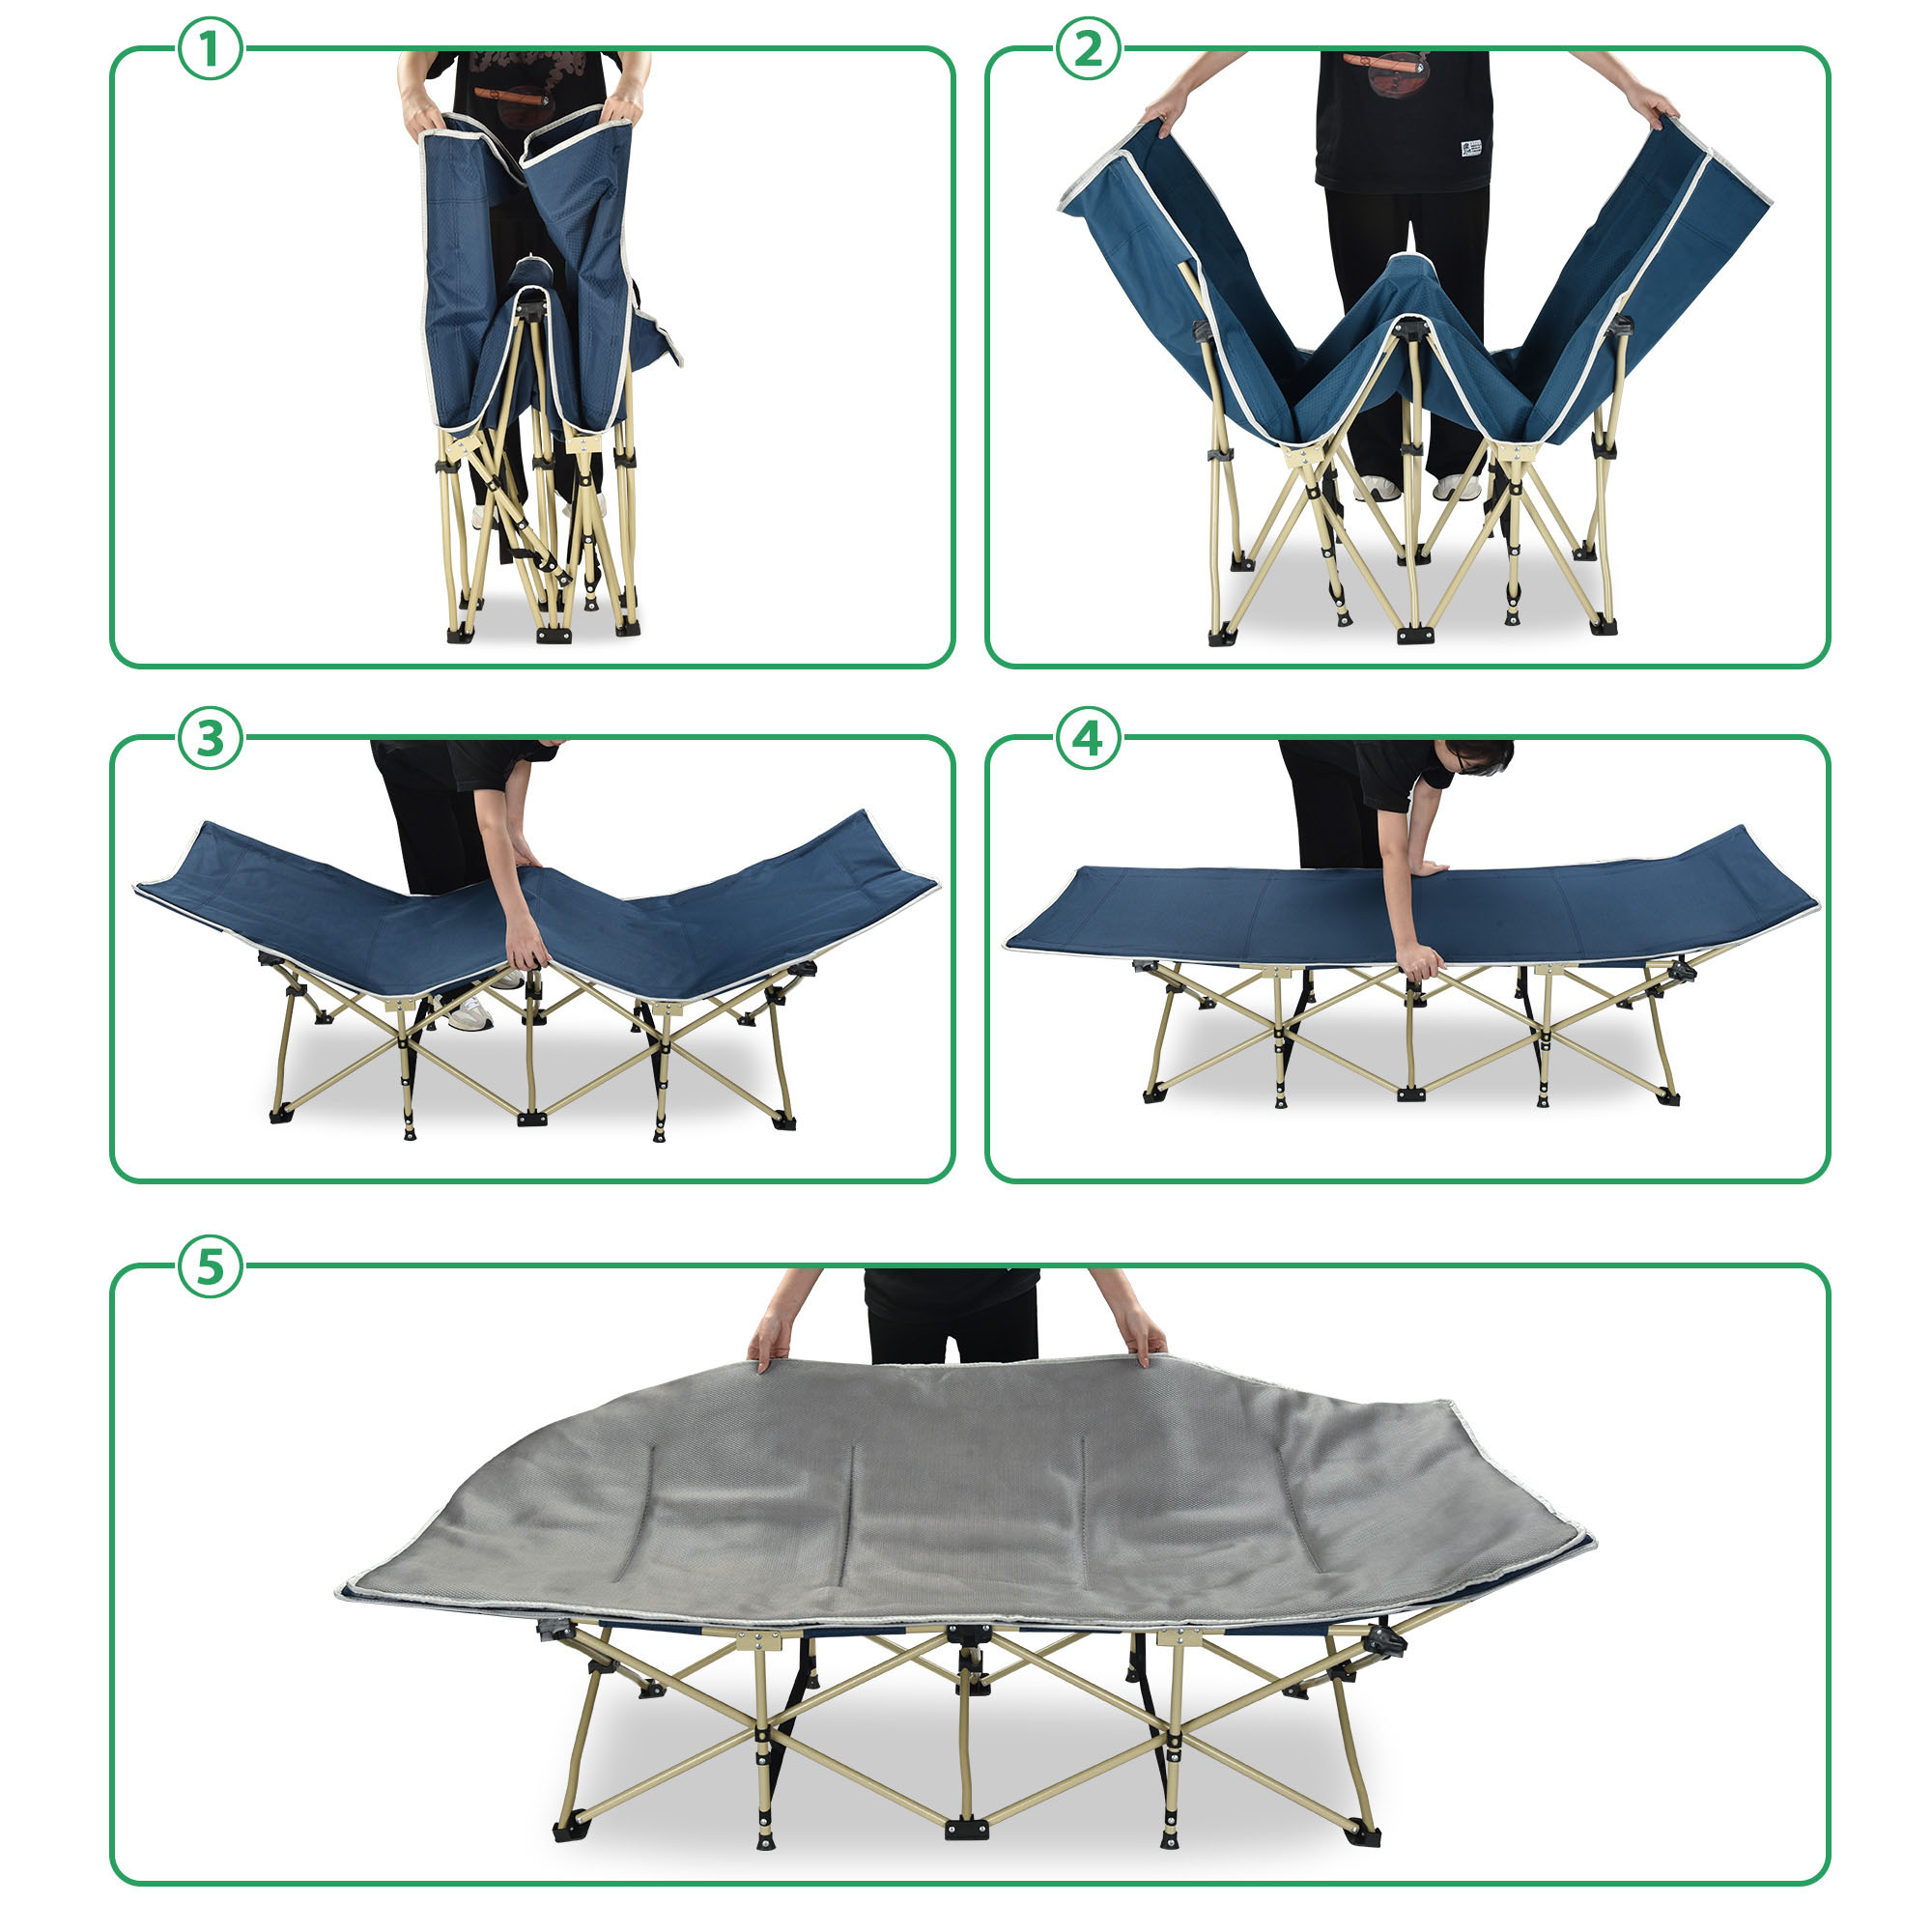 Yescom Folding Cot Collapsible Camping Bed with Carrying Bag Travel Outdoor Home 2 Pack